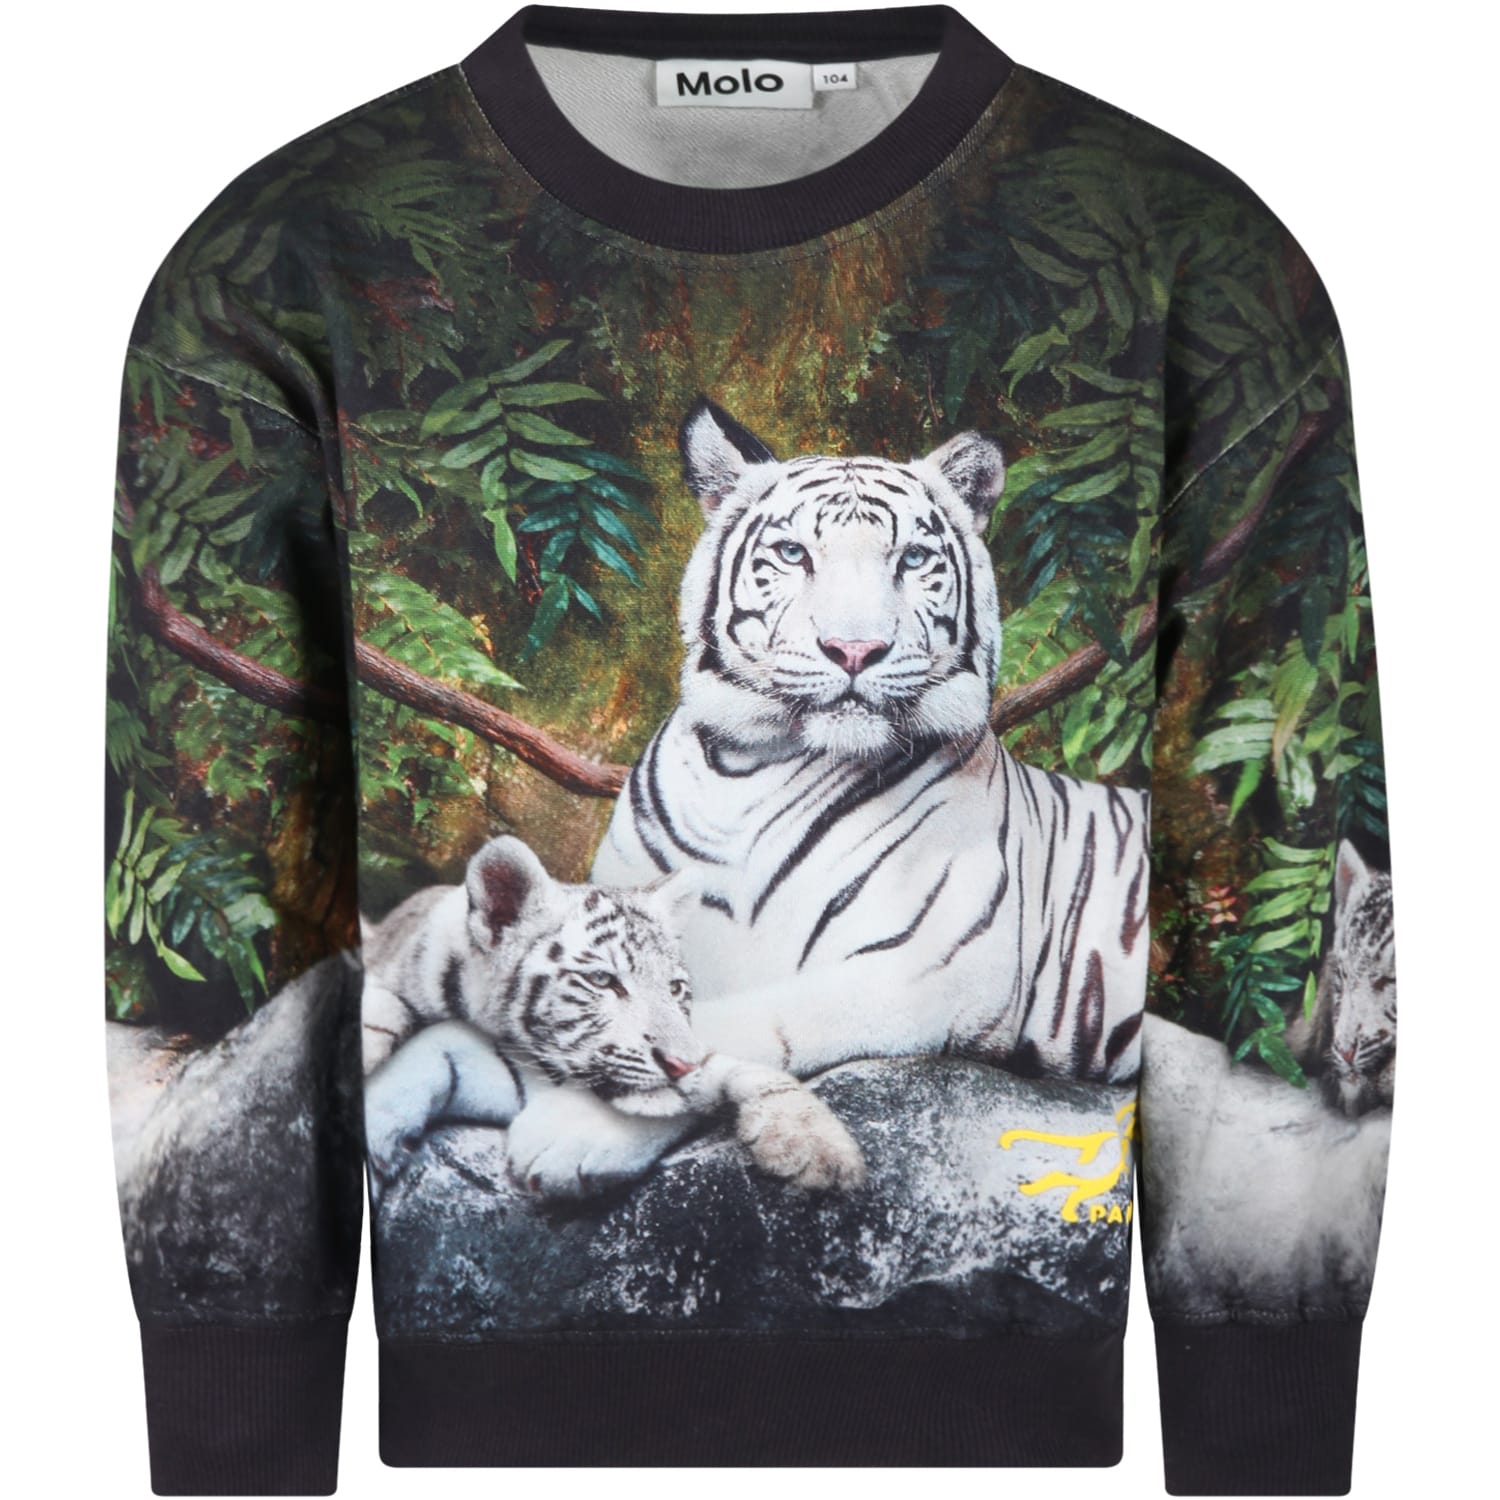 Molo Black Sweatshirt For Kids With Tigers